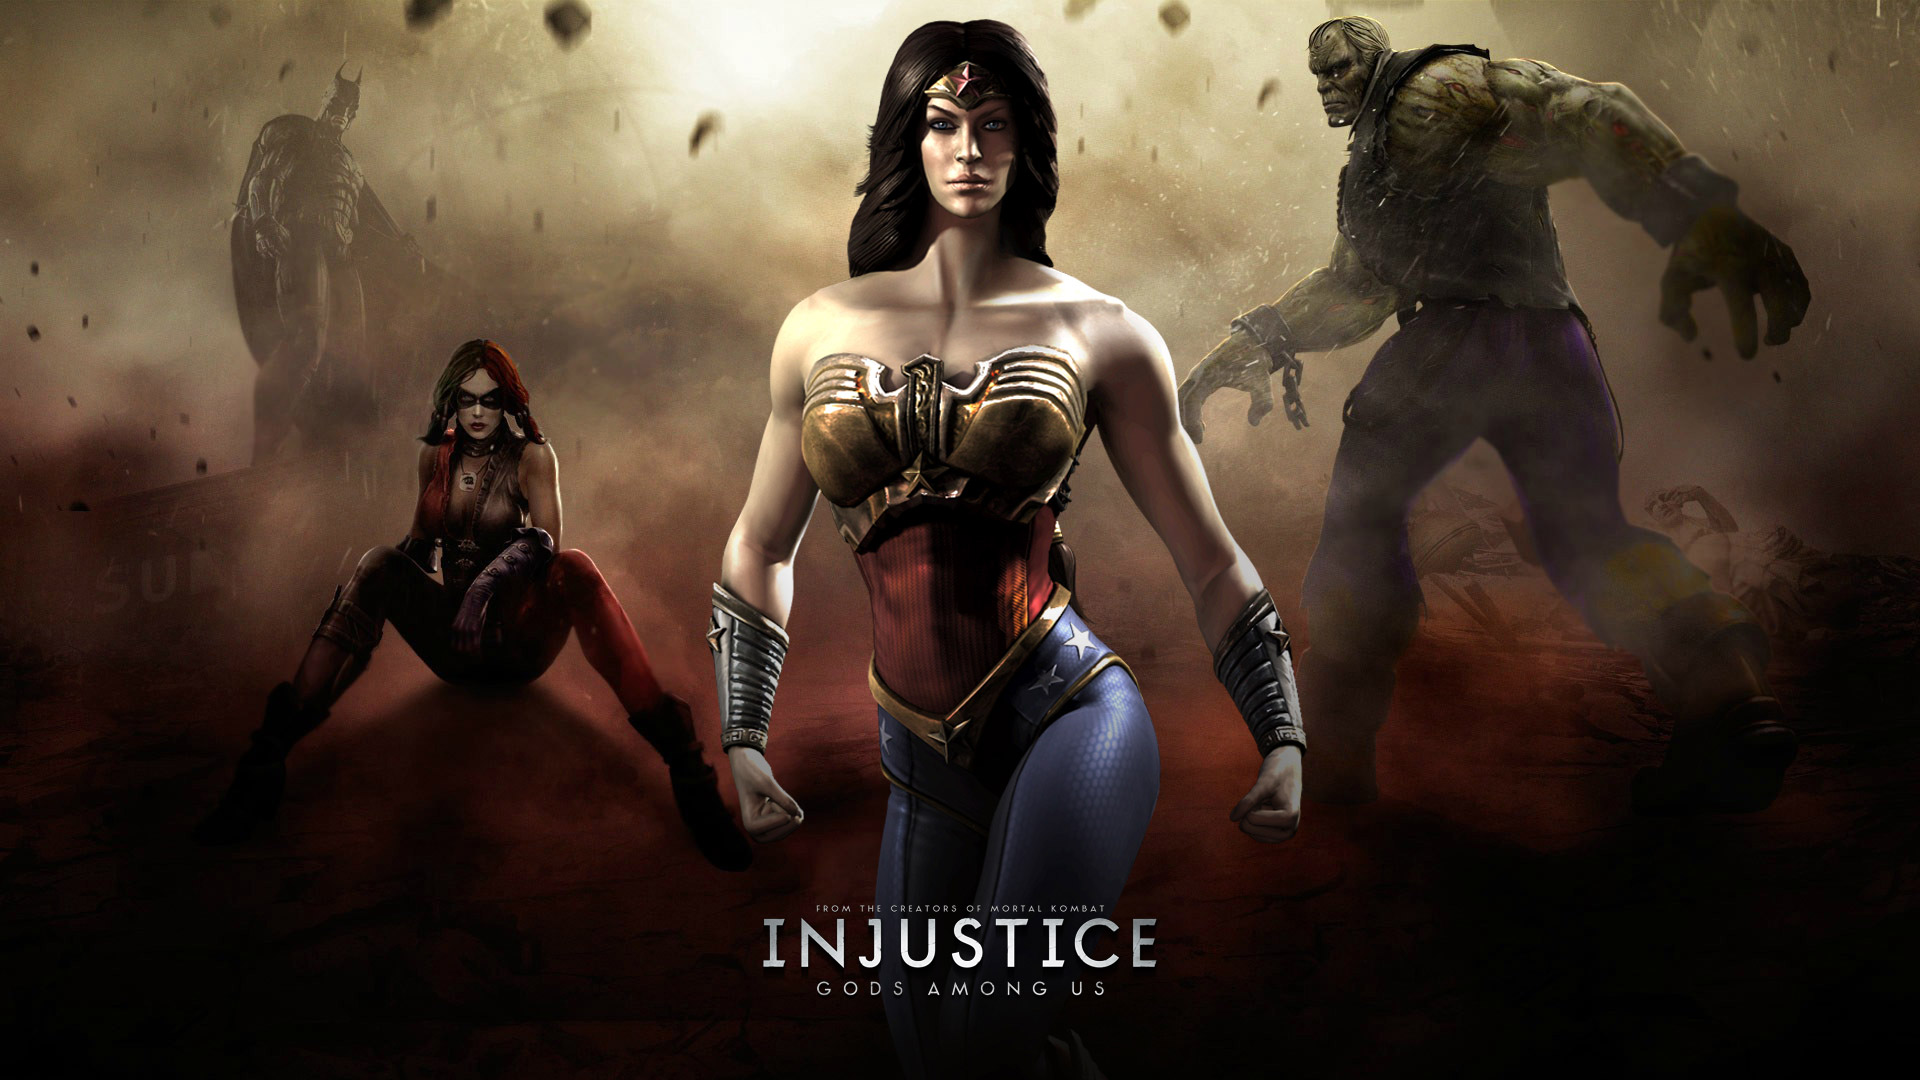 Free Injustice Gods Among Us Wallpaper in 1920x1080